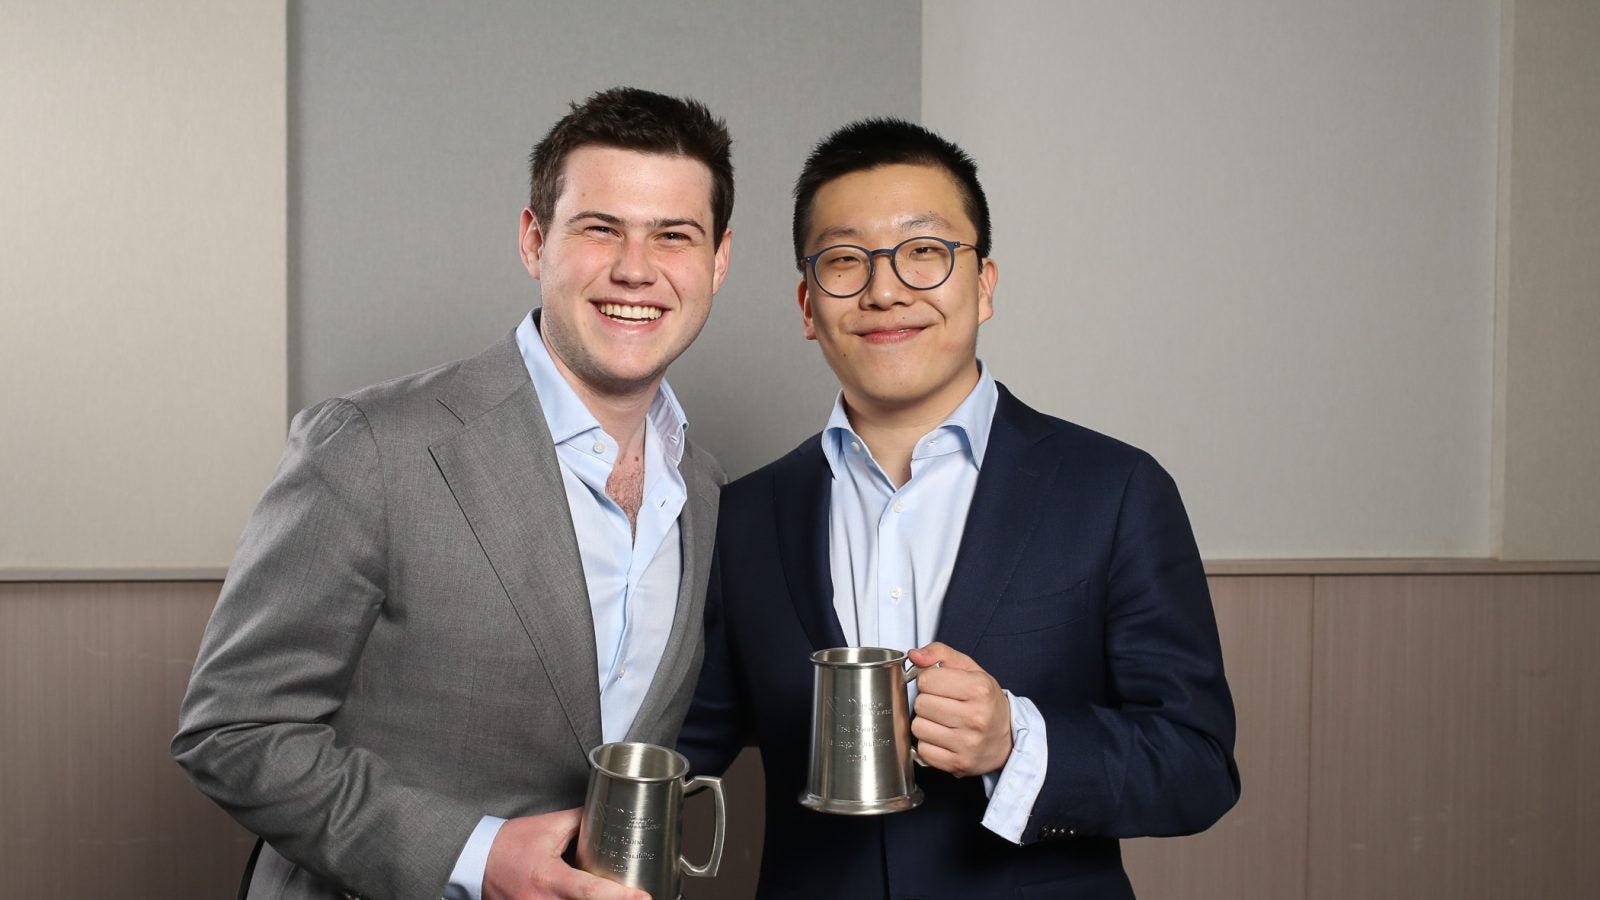 Two male Georgetown students dressed in suits hold metal cups, a prize for a debate tournament.